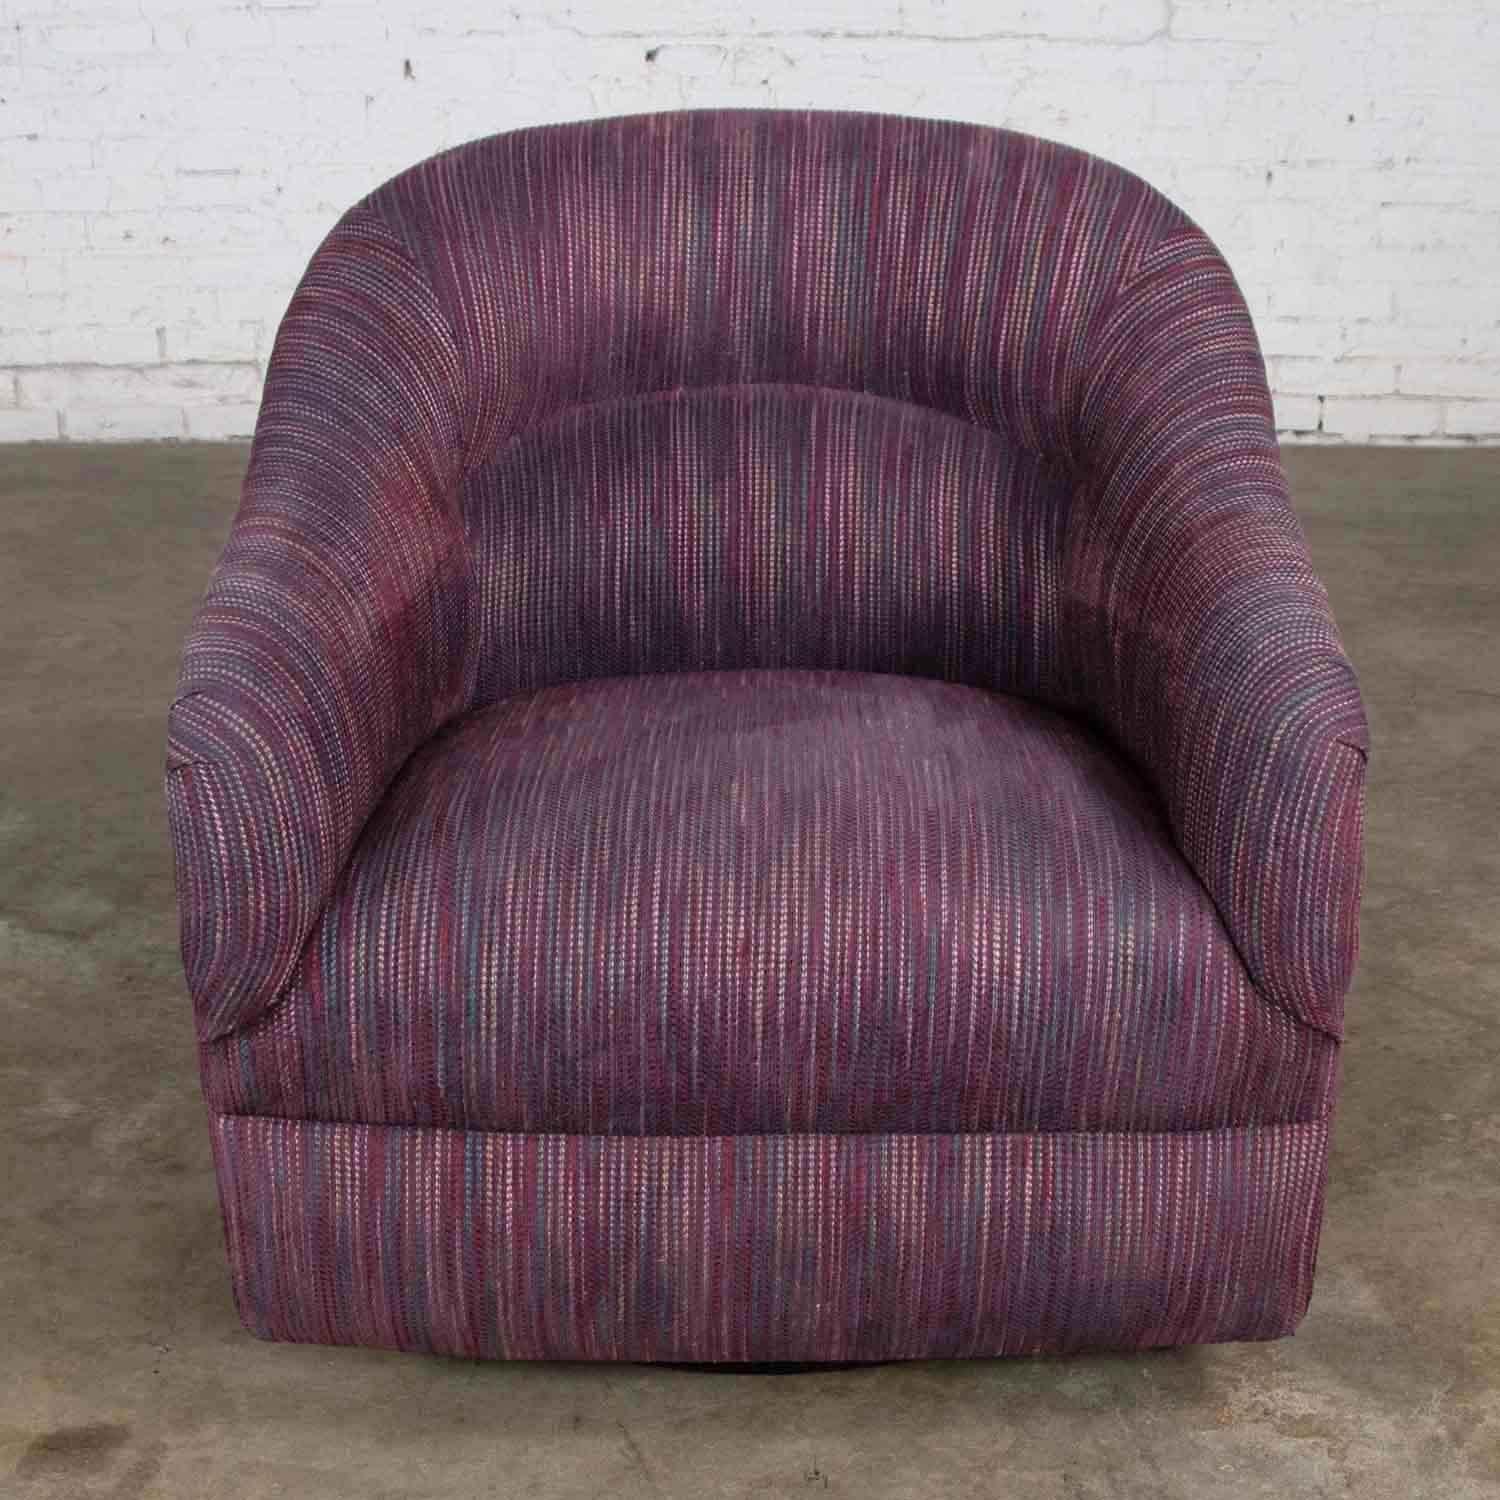 Handsome modern swivel rocking tub chair in aubergine or eggplant purple upholstery fabric. It is in wonderful vintage condition. There is a slight fading to the fabric but because of its variegated coloration is it hard to distinguish. Please see